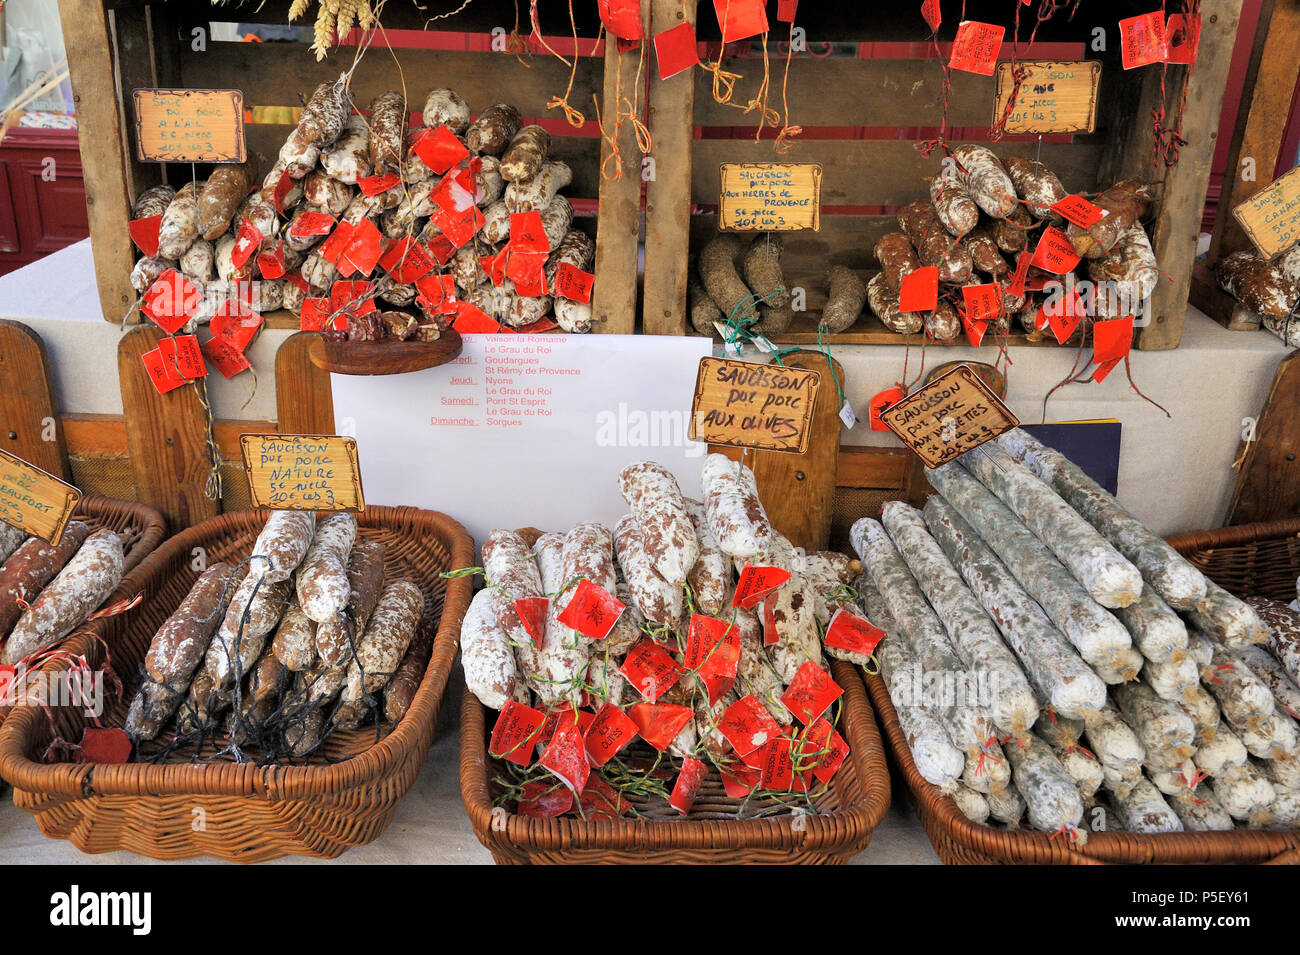 Different varieties of saucisson in a French market stall. Please note that the labels indicate ingredients for the sausages, not brand names, so no c Stock Photo